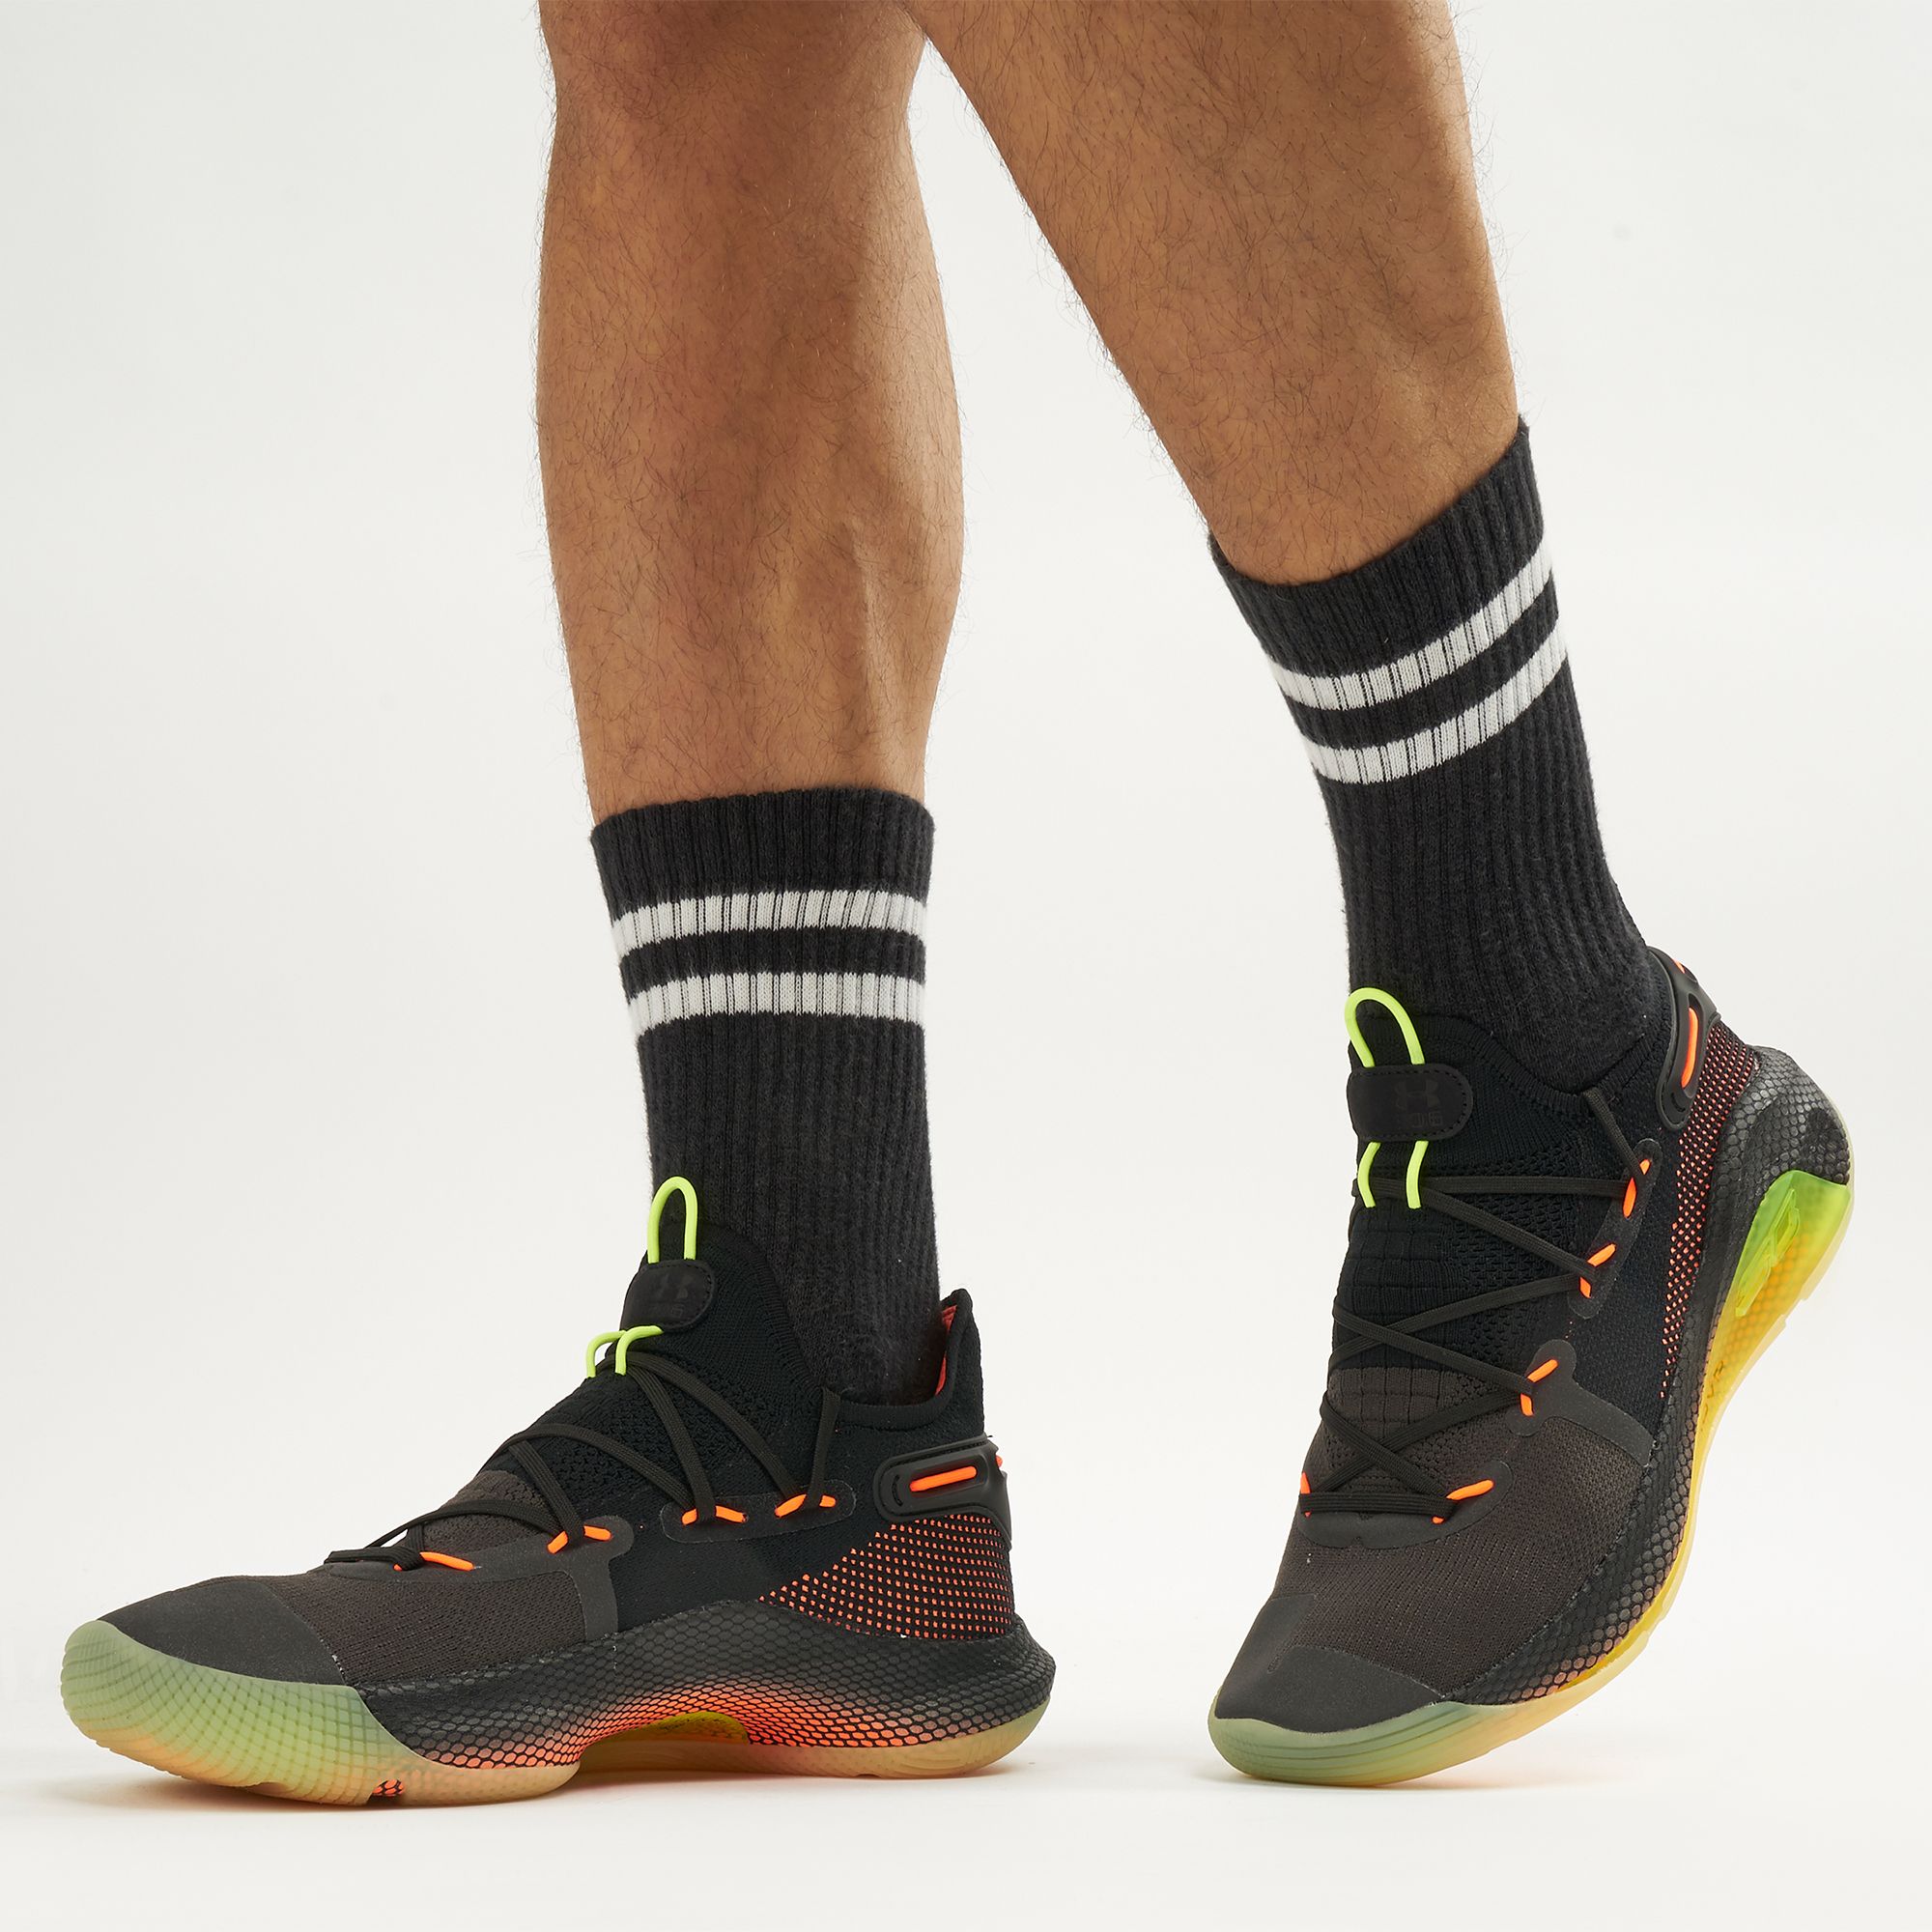 Buy Under Armour Men's Curry 6 Basketball Shoe Online in Dubai, UAE | SSS